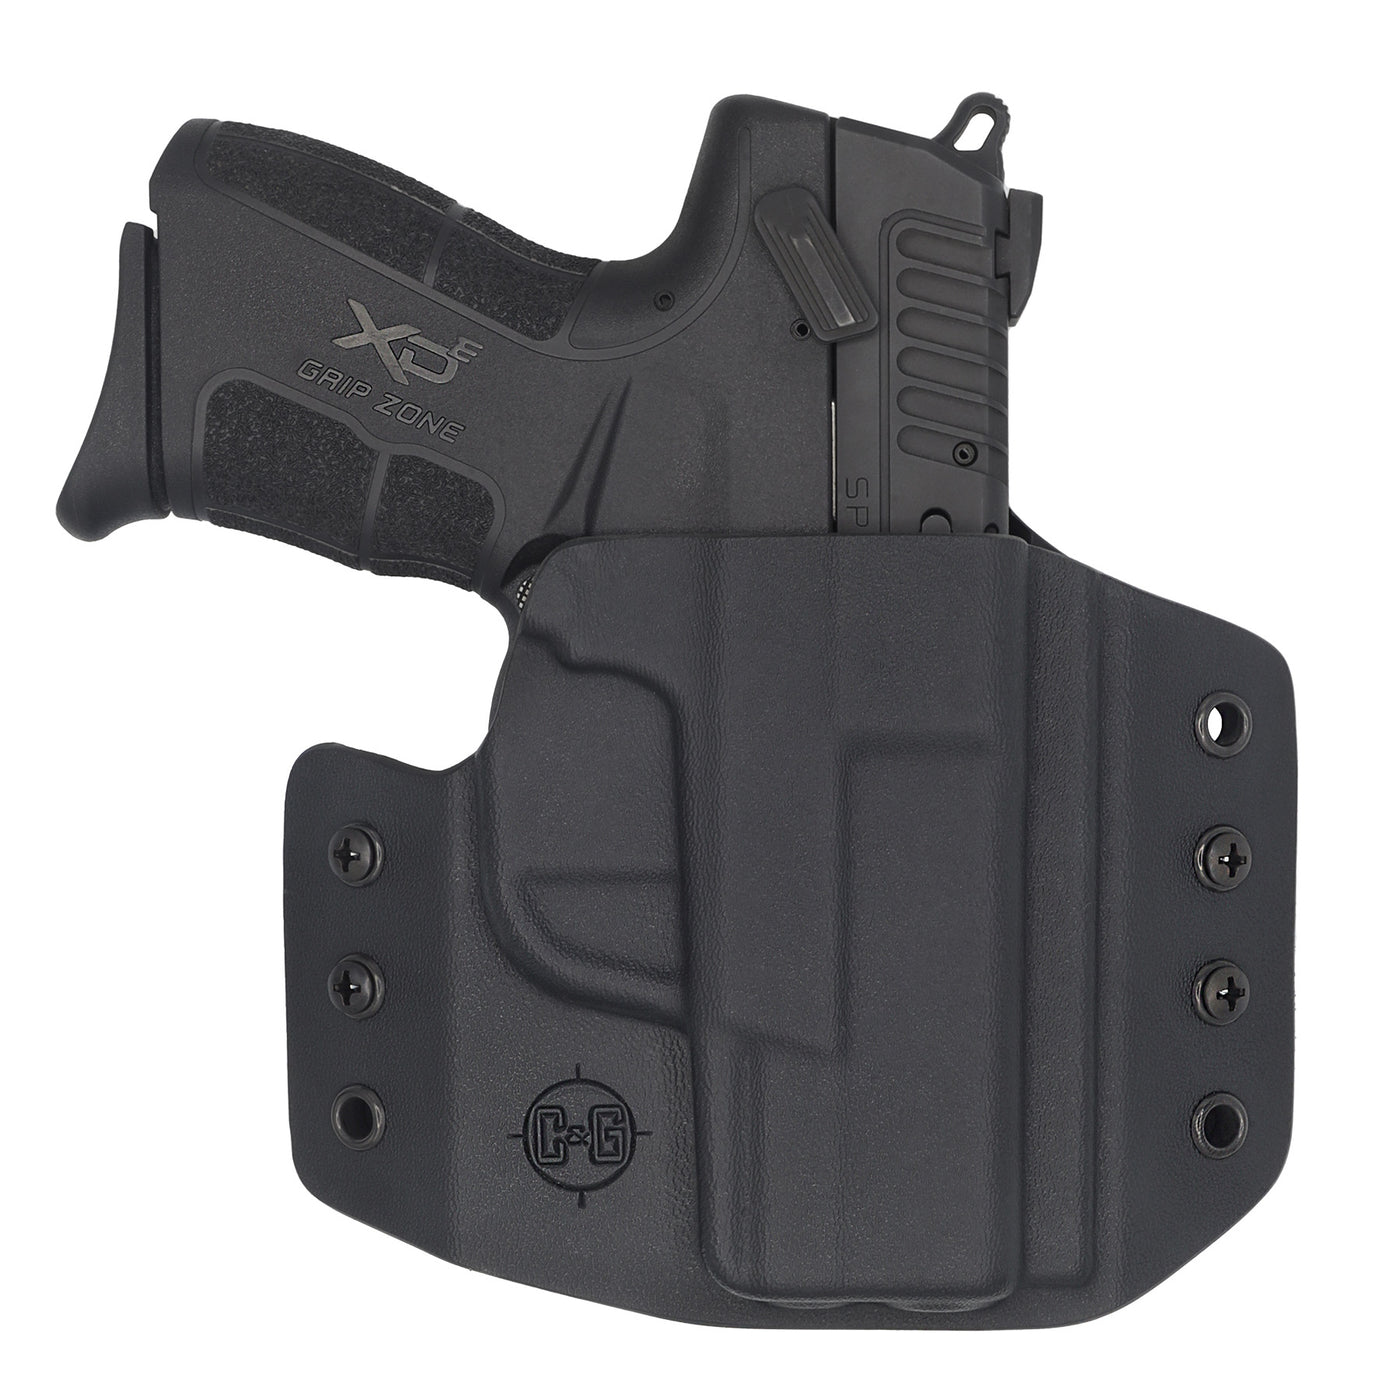 C&G Holsters quickship OWB Covert Springfield XDe 3.3" in holstered position